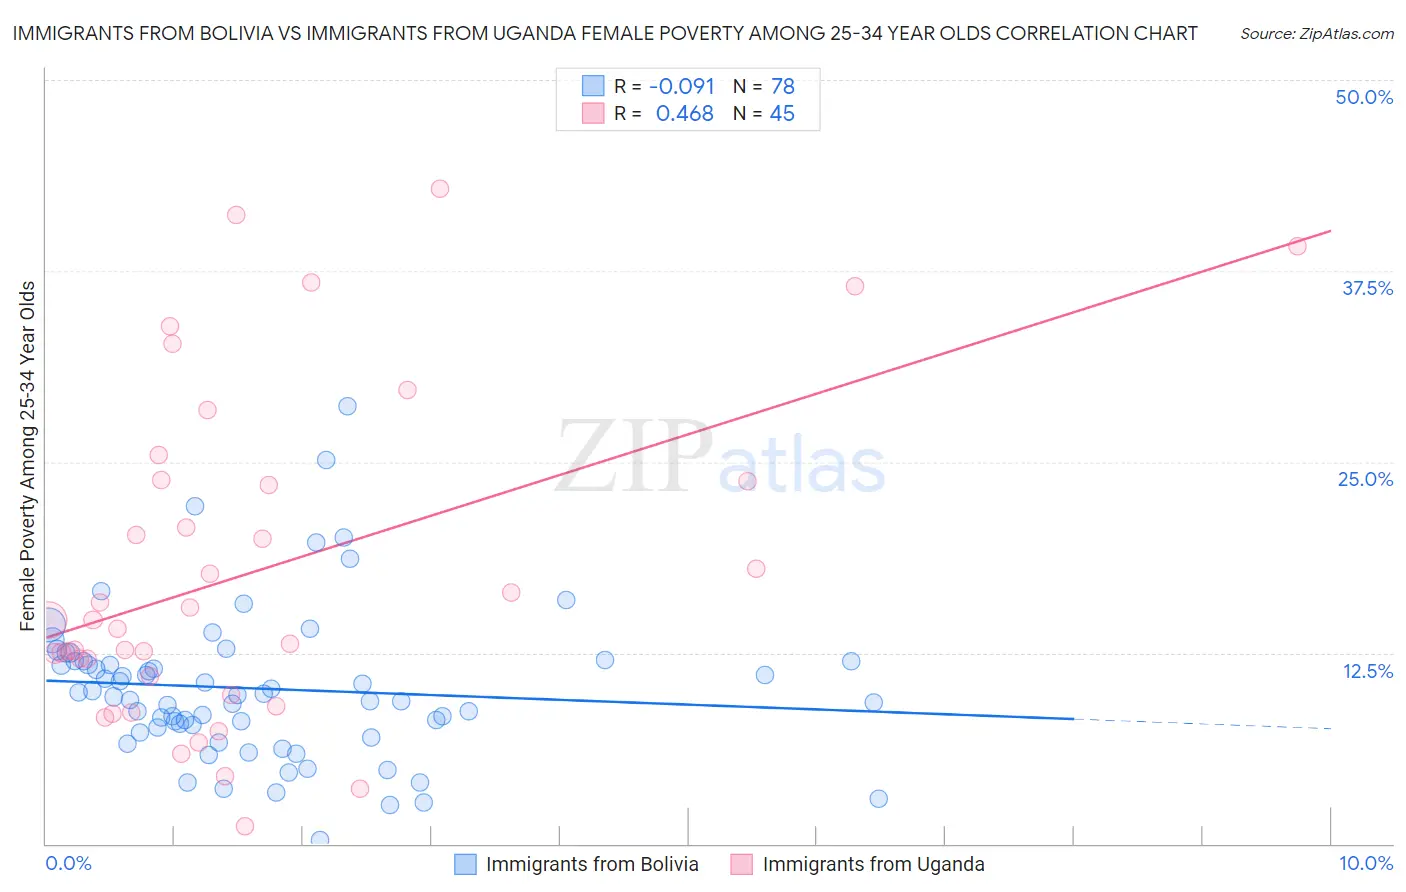 Immigrants from Bolivia vs Immigrants from Uganda Female Poverty Among 25-34 Year Olds